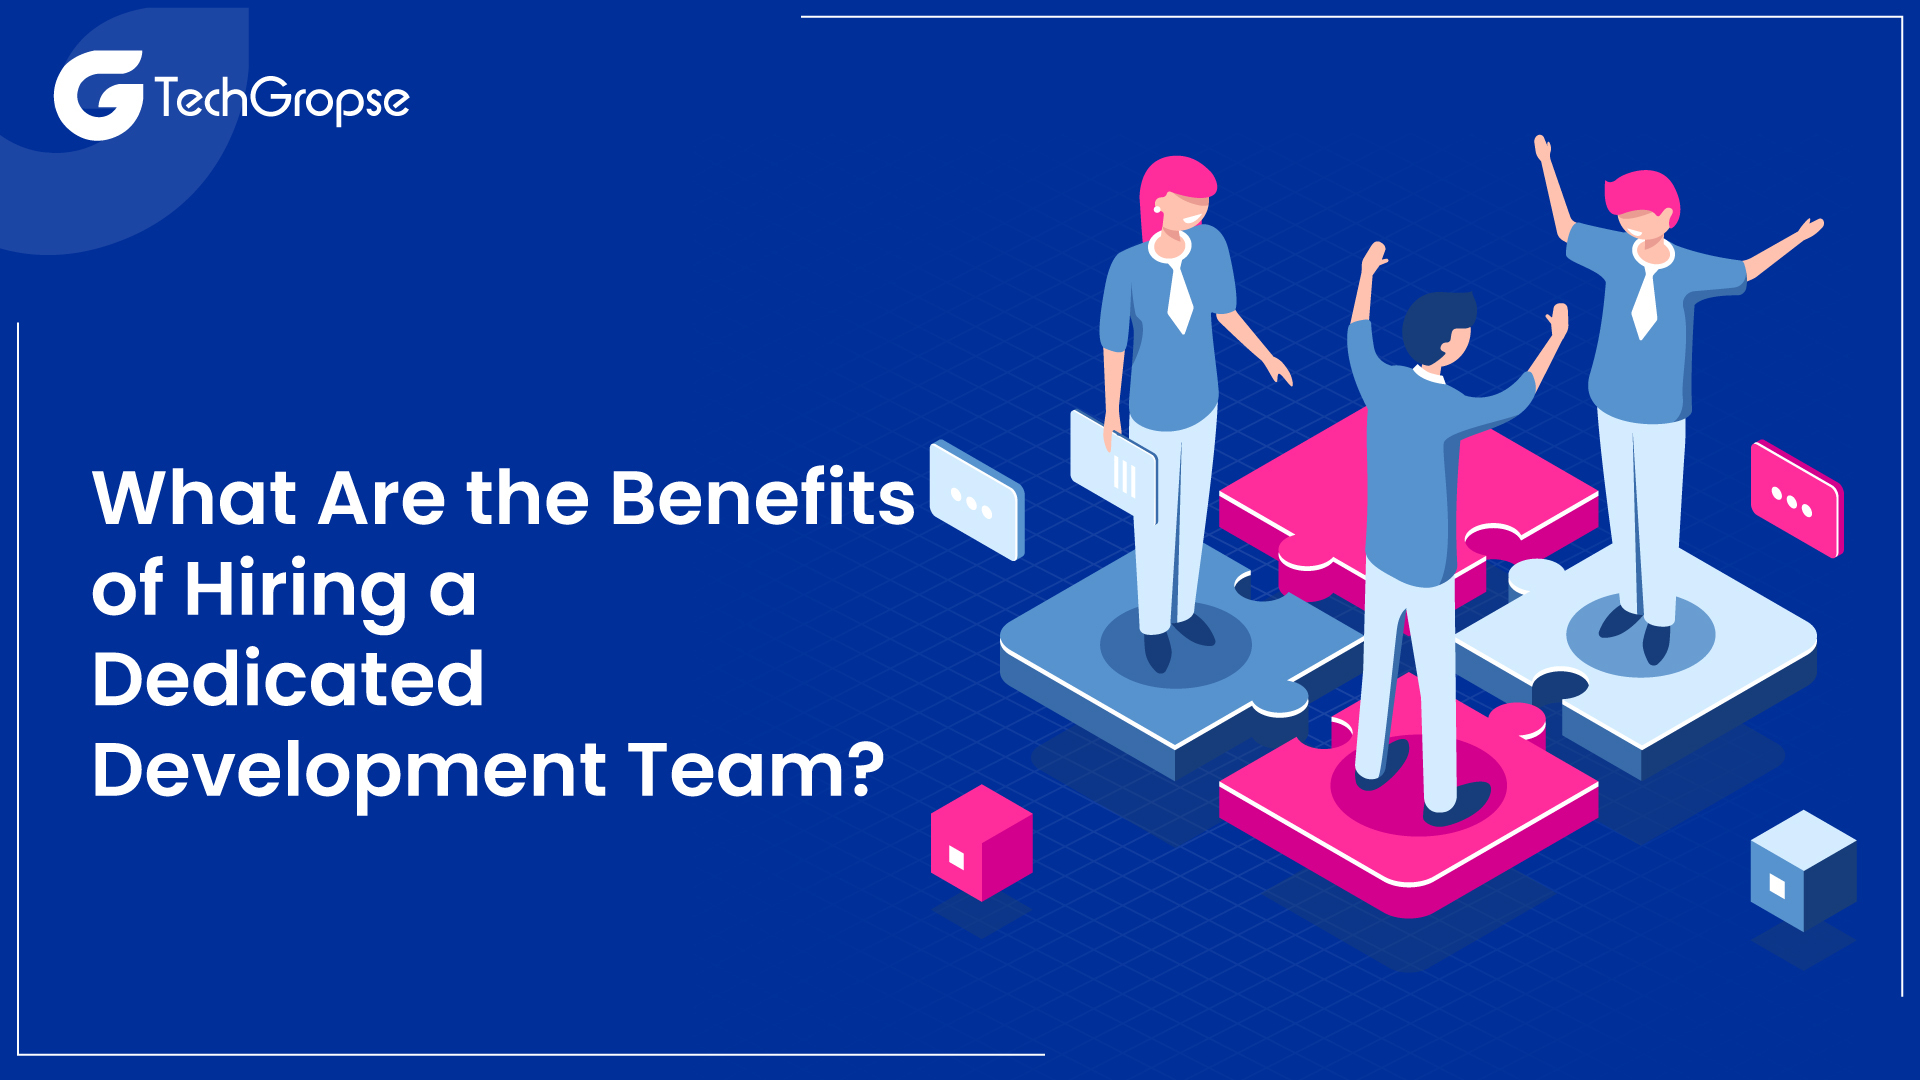 What Are the Benefits of Hiring a Dedicated Development Team?